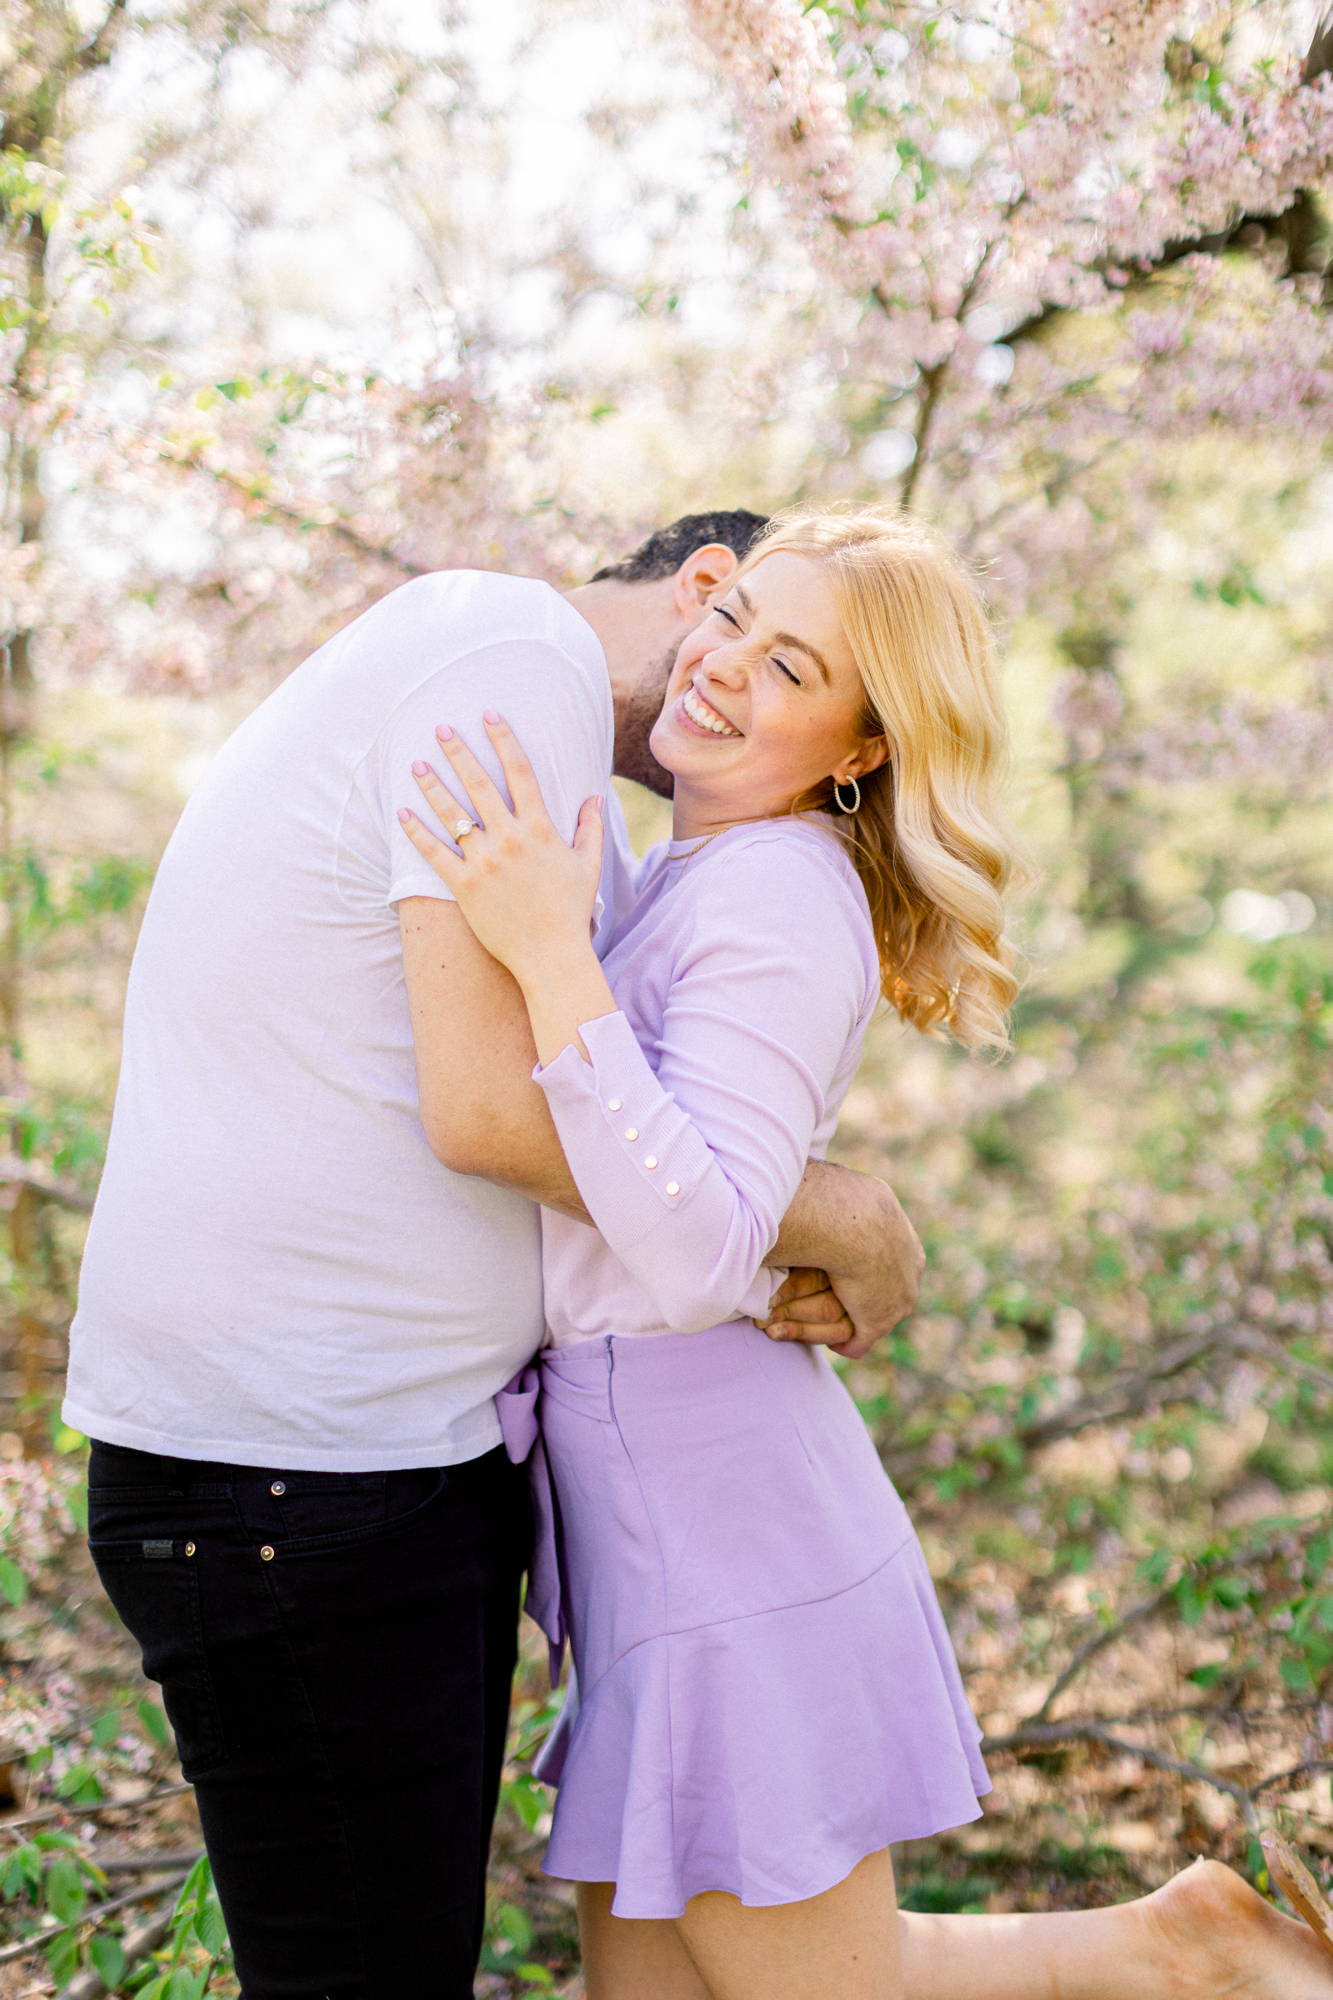 Light New York Engagement Photography with Spring Blossoms